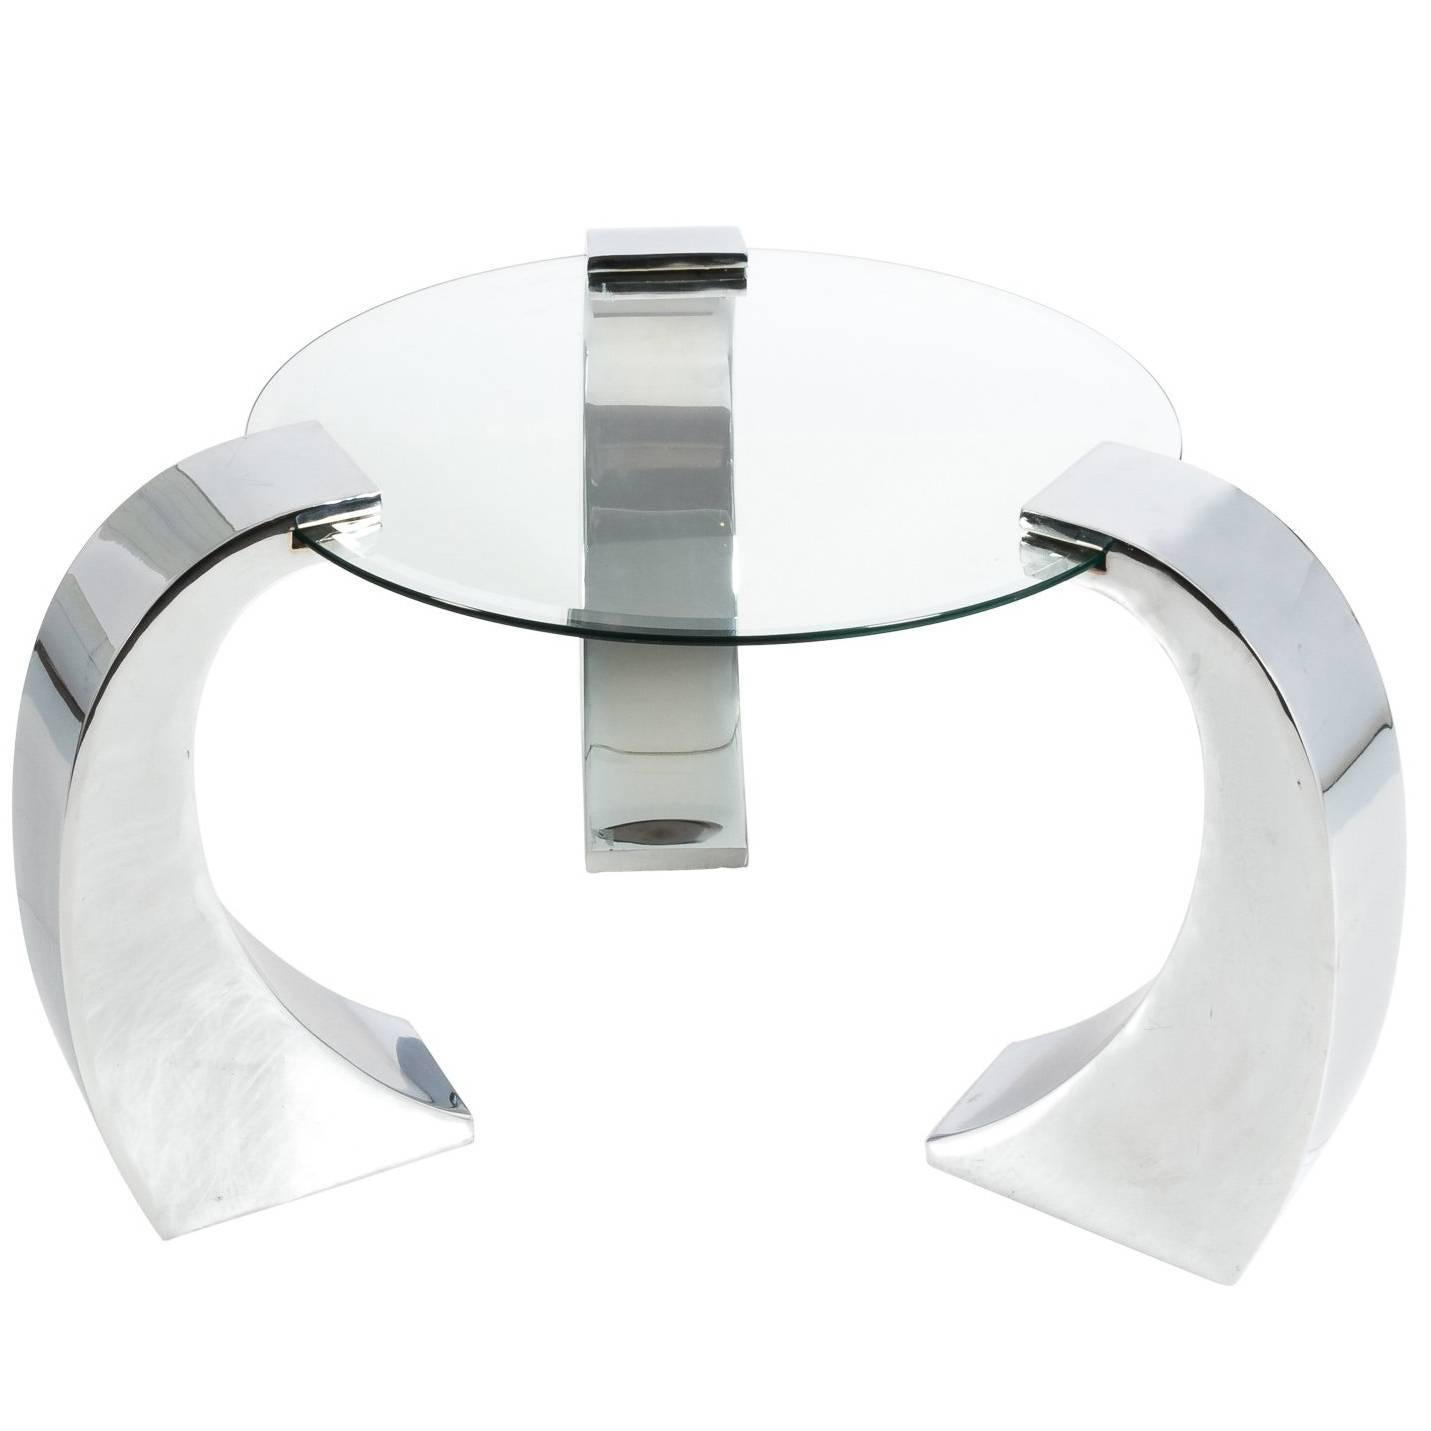 Contemporary Chrome and Glass Circular Table For Sale